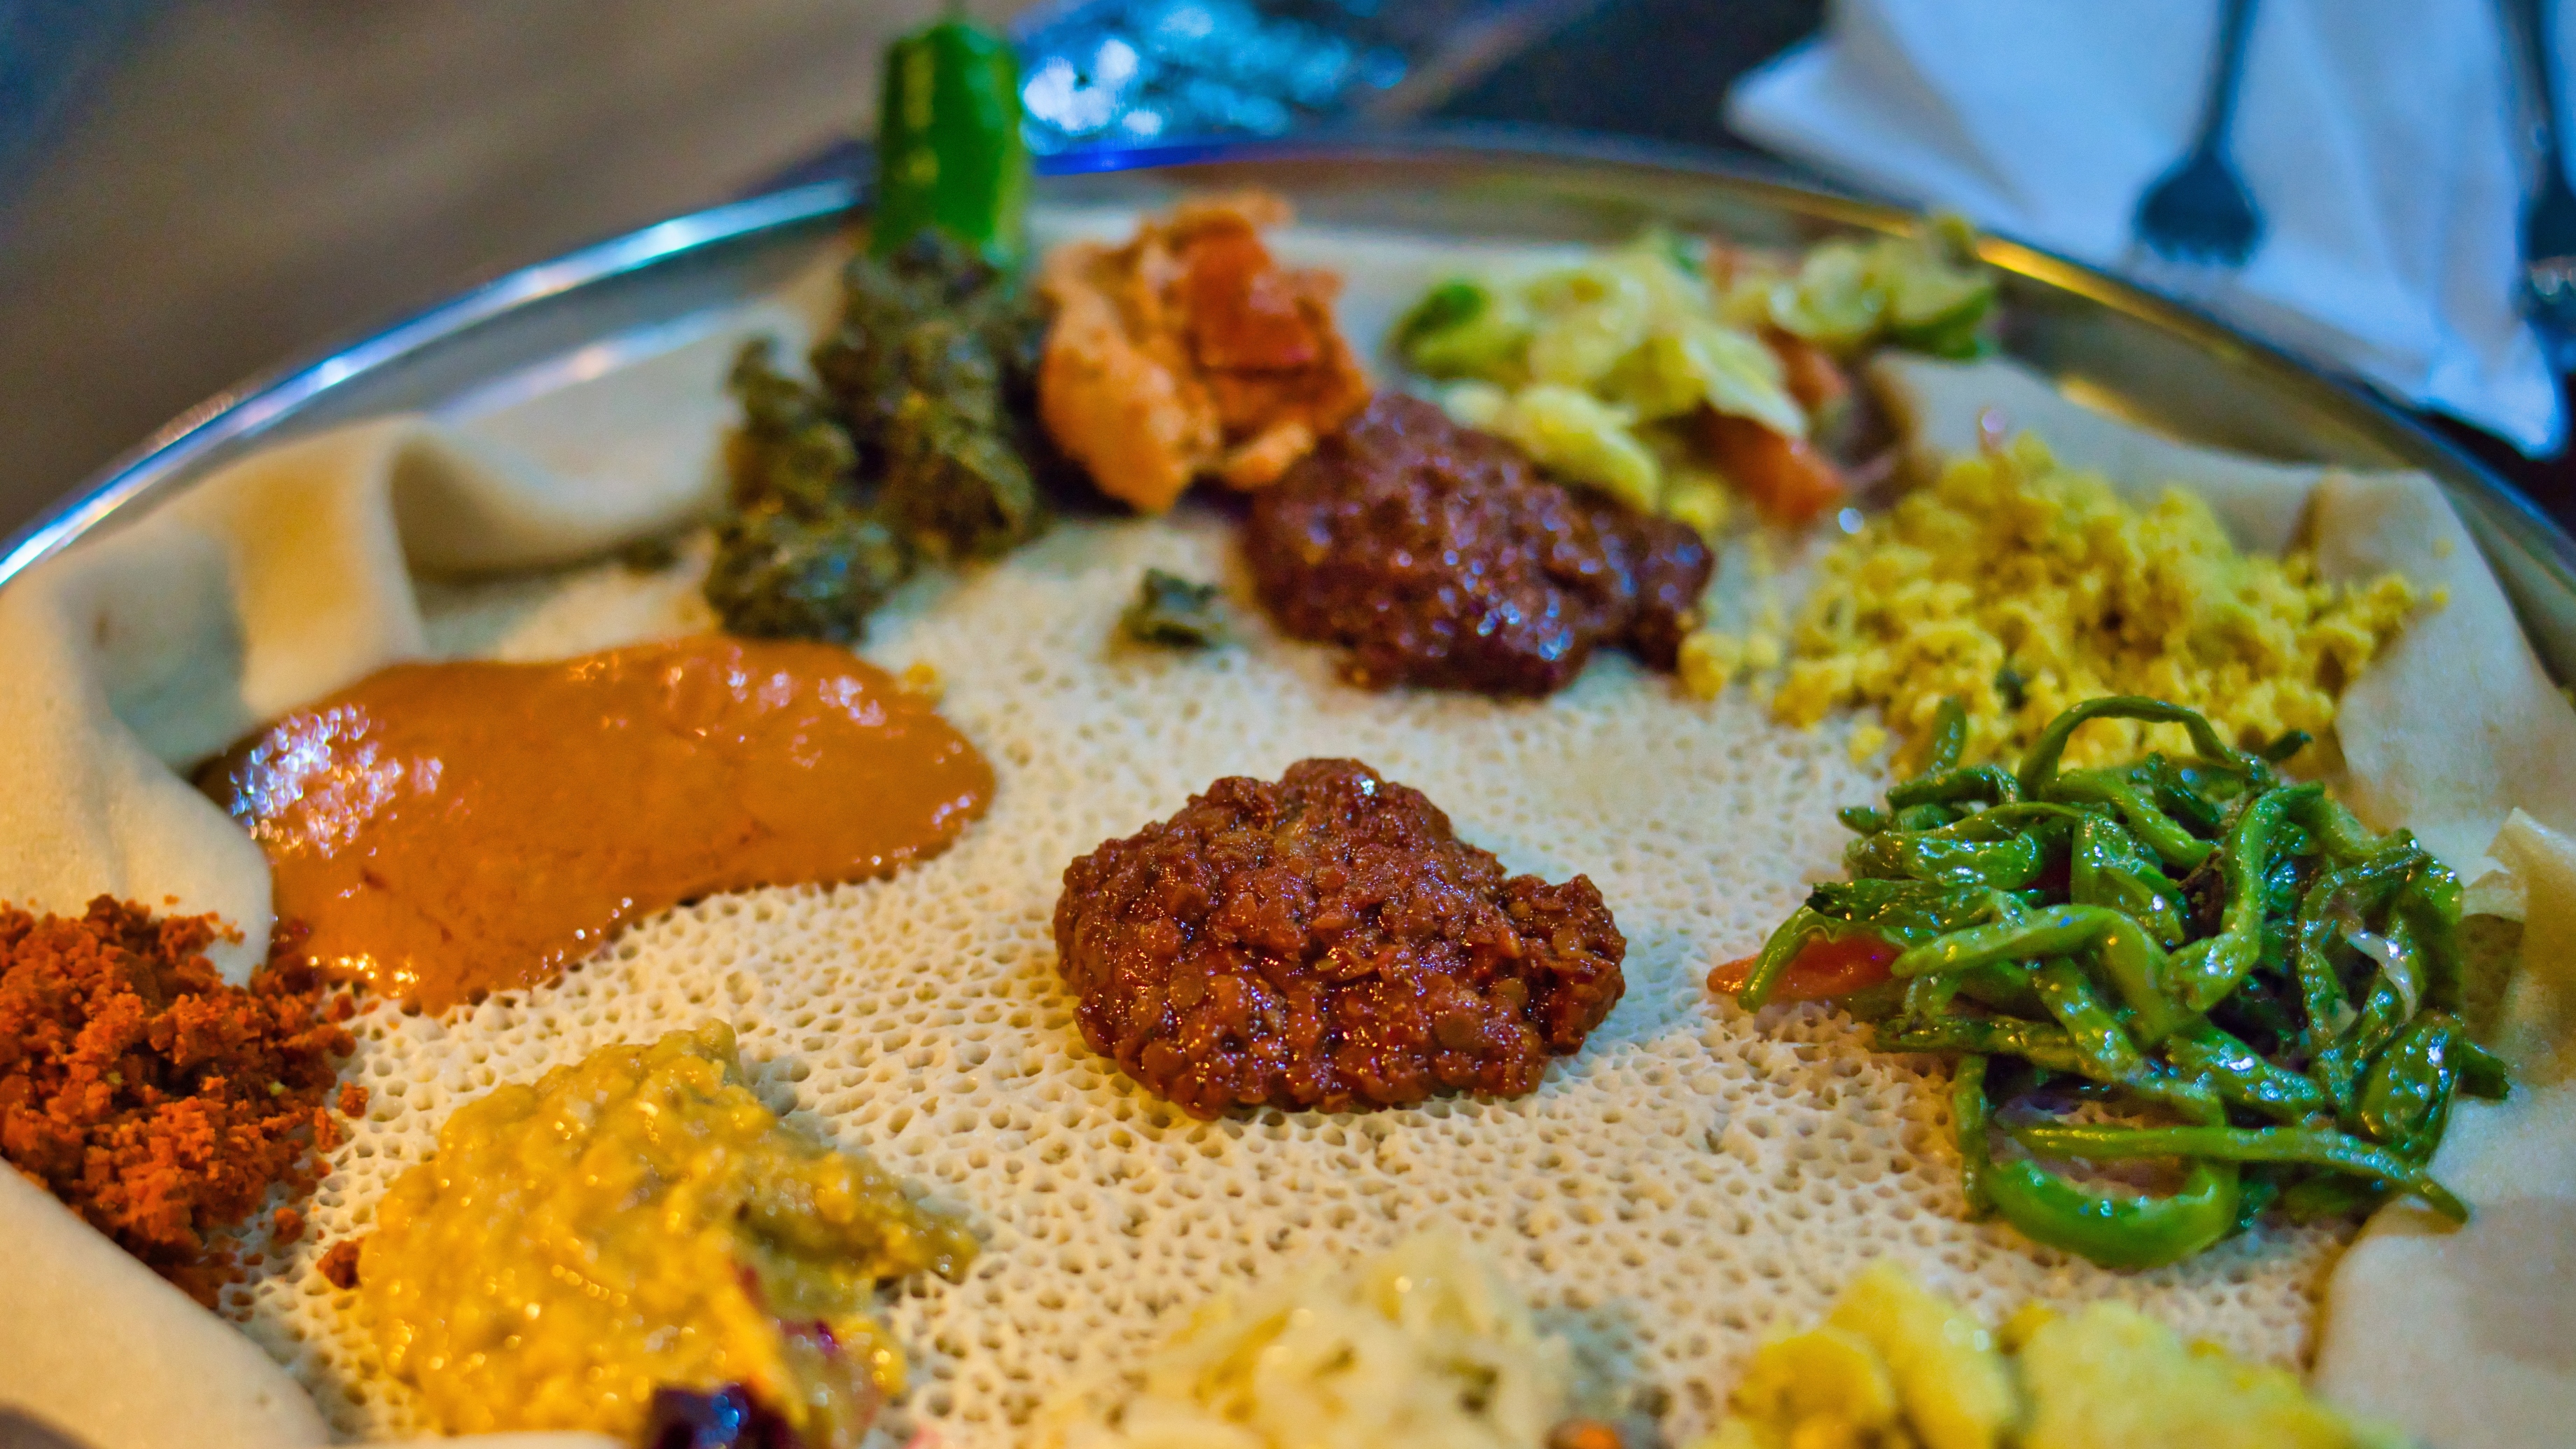 Addis Ababa, Ethiopia - December 18, 2018: Beyaynetu food, which is an Ethiopian combination platter, served on injera, which represents the traditional Ethiopian flat bread.